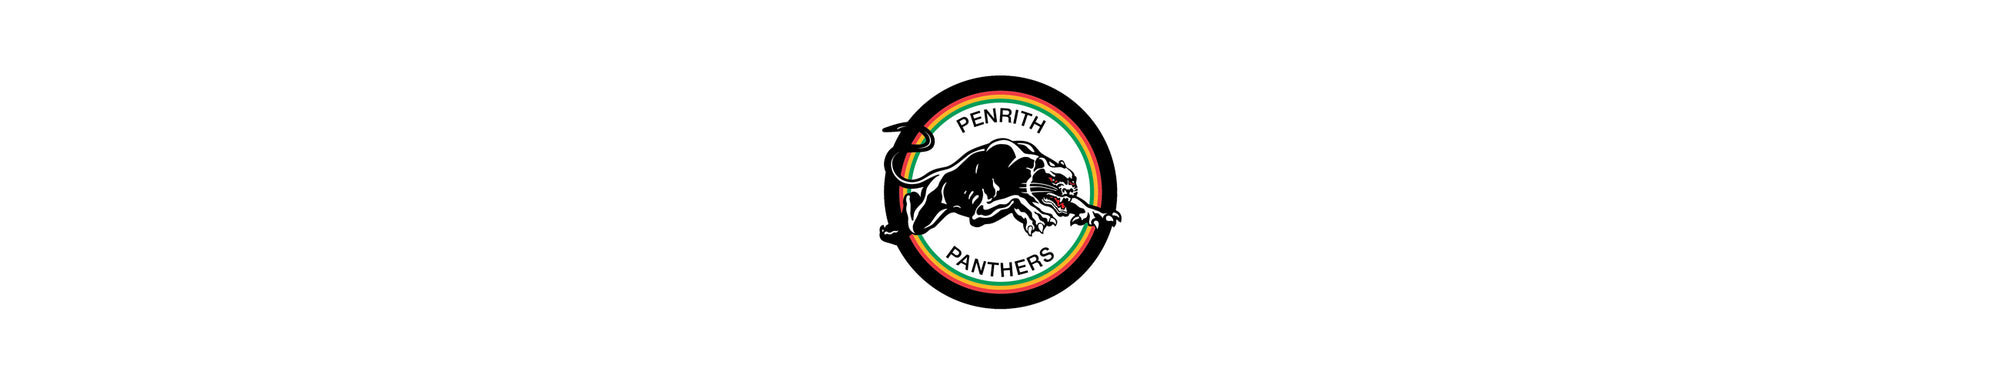 Retro Penrith Panthers